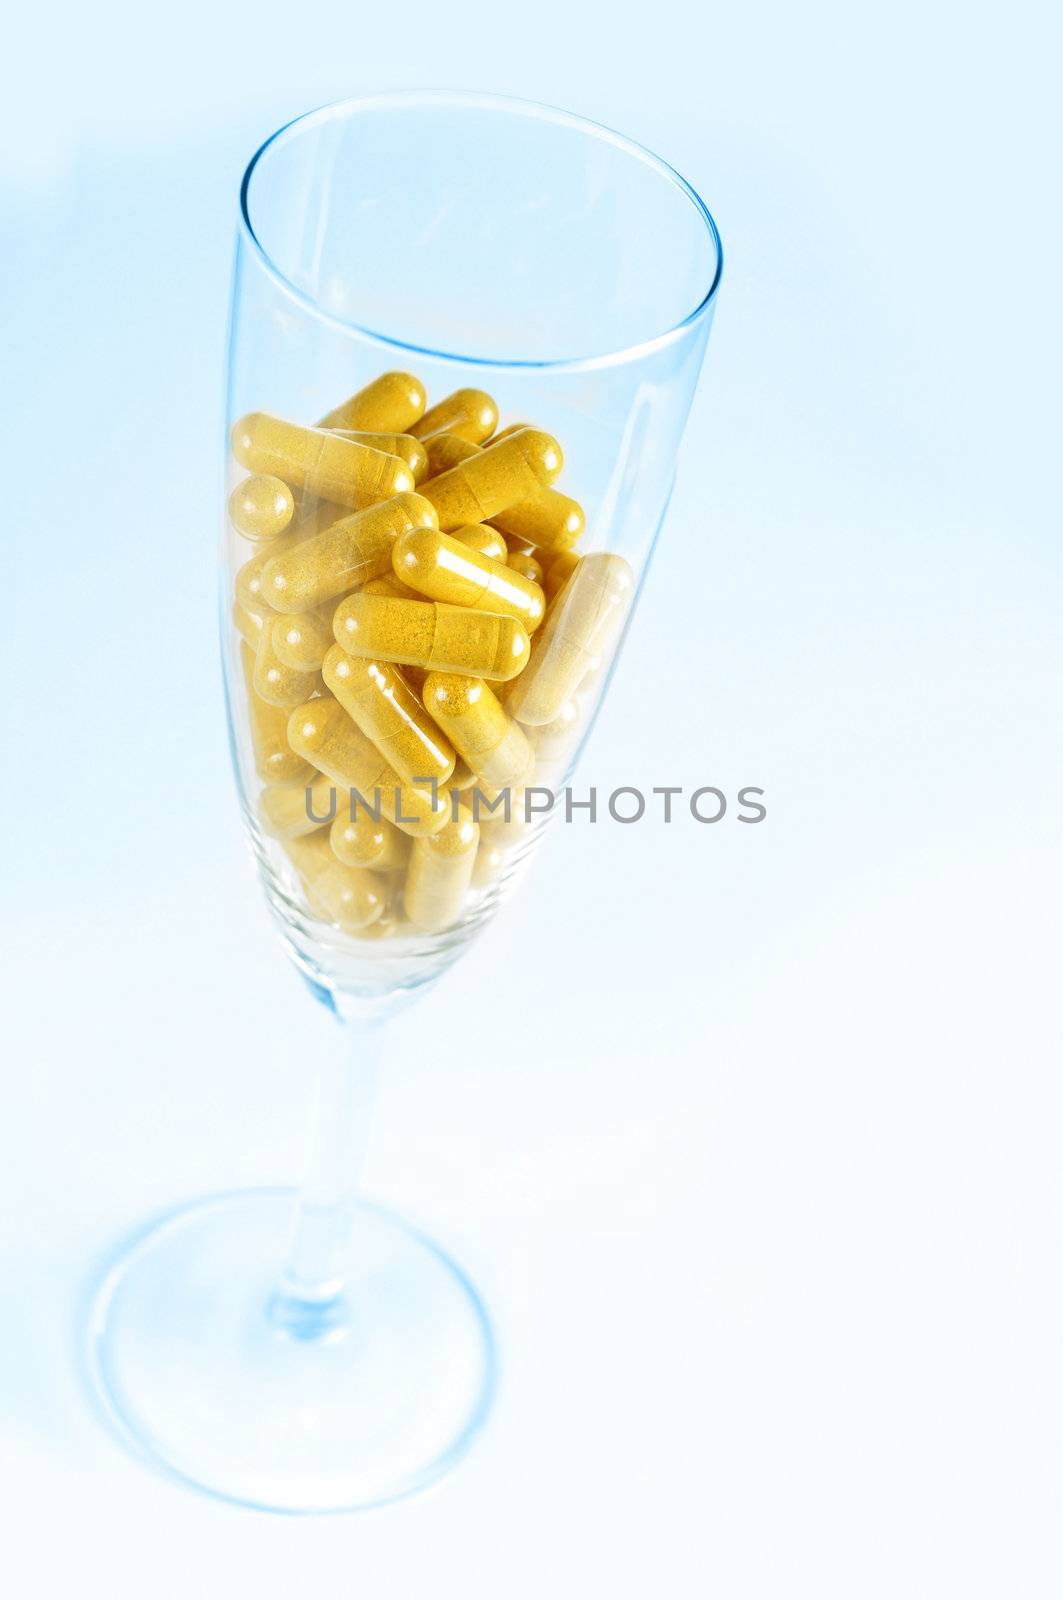 Conceptual image about the risk of taking pills with alcohol. Blue background.